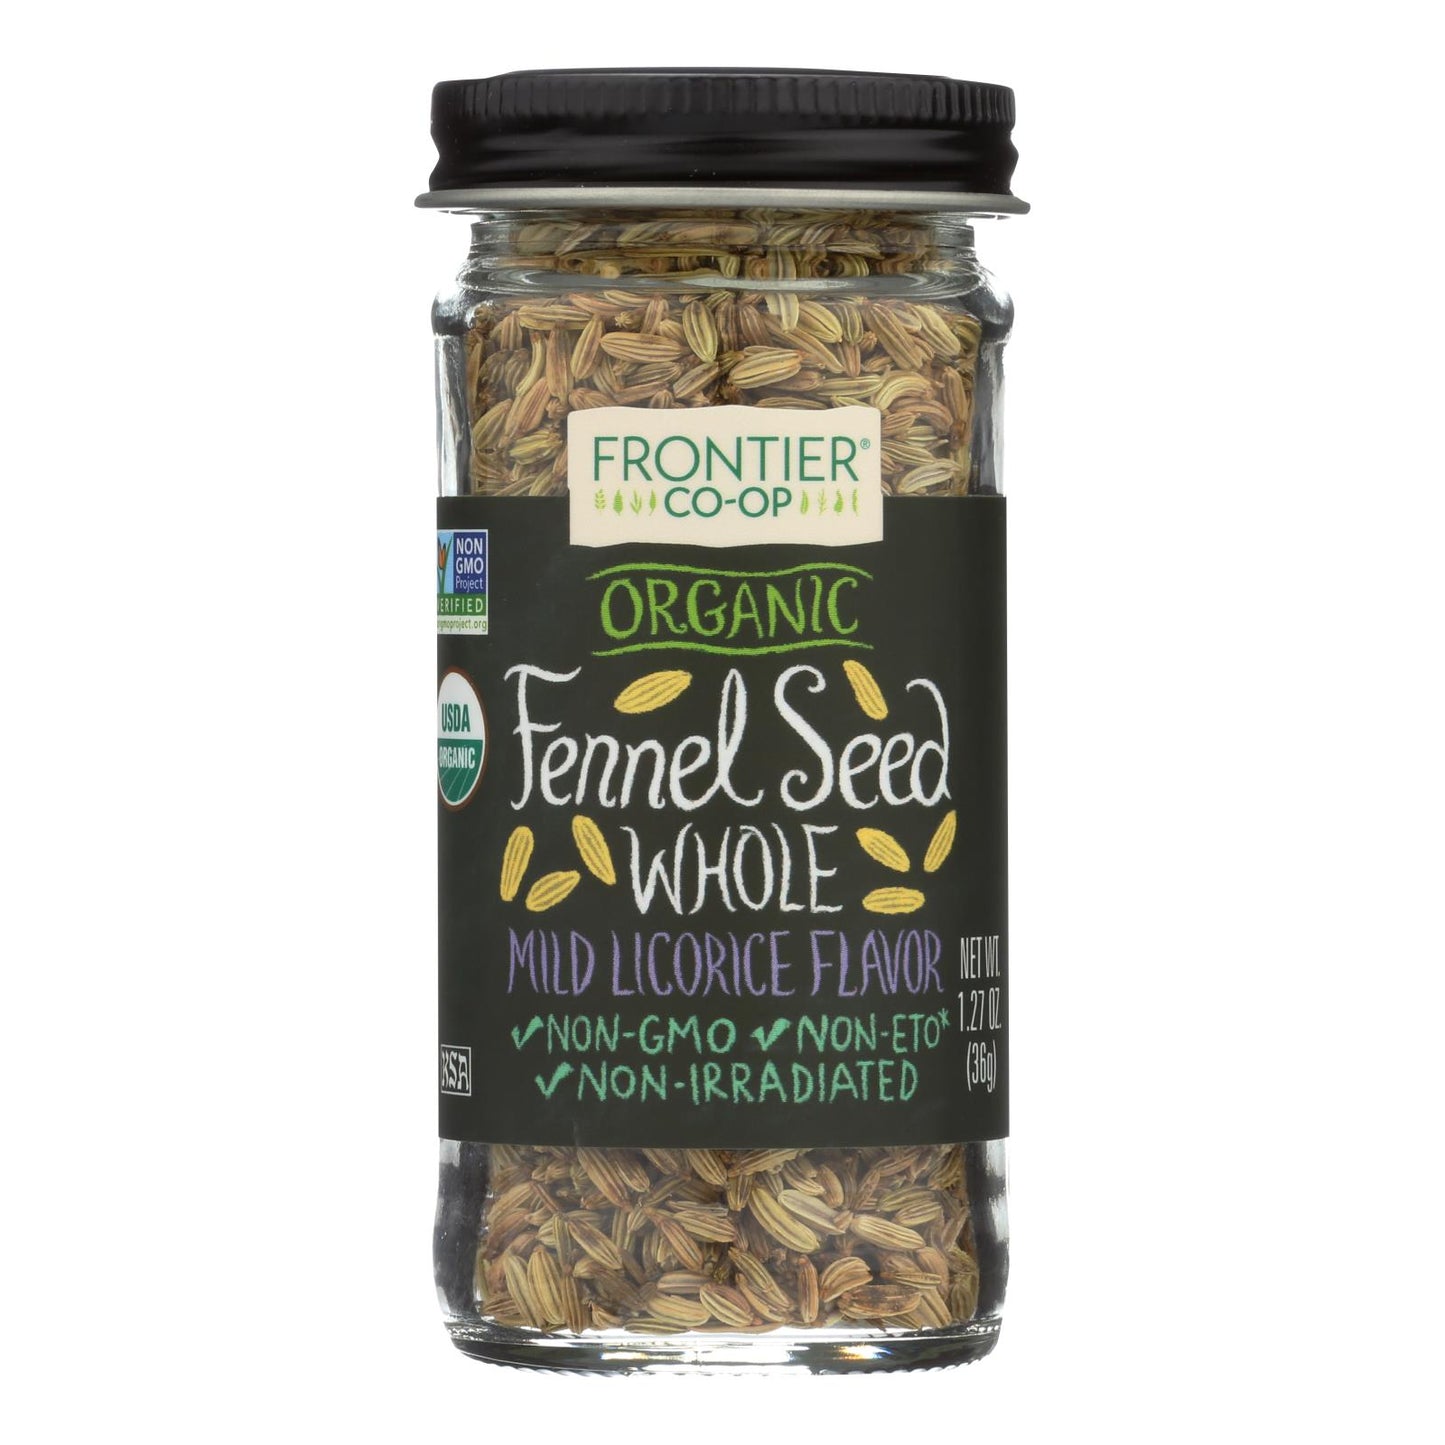 Organic Whole Fennel Seed | Frontier Herb